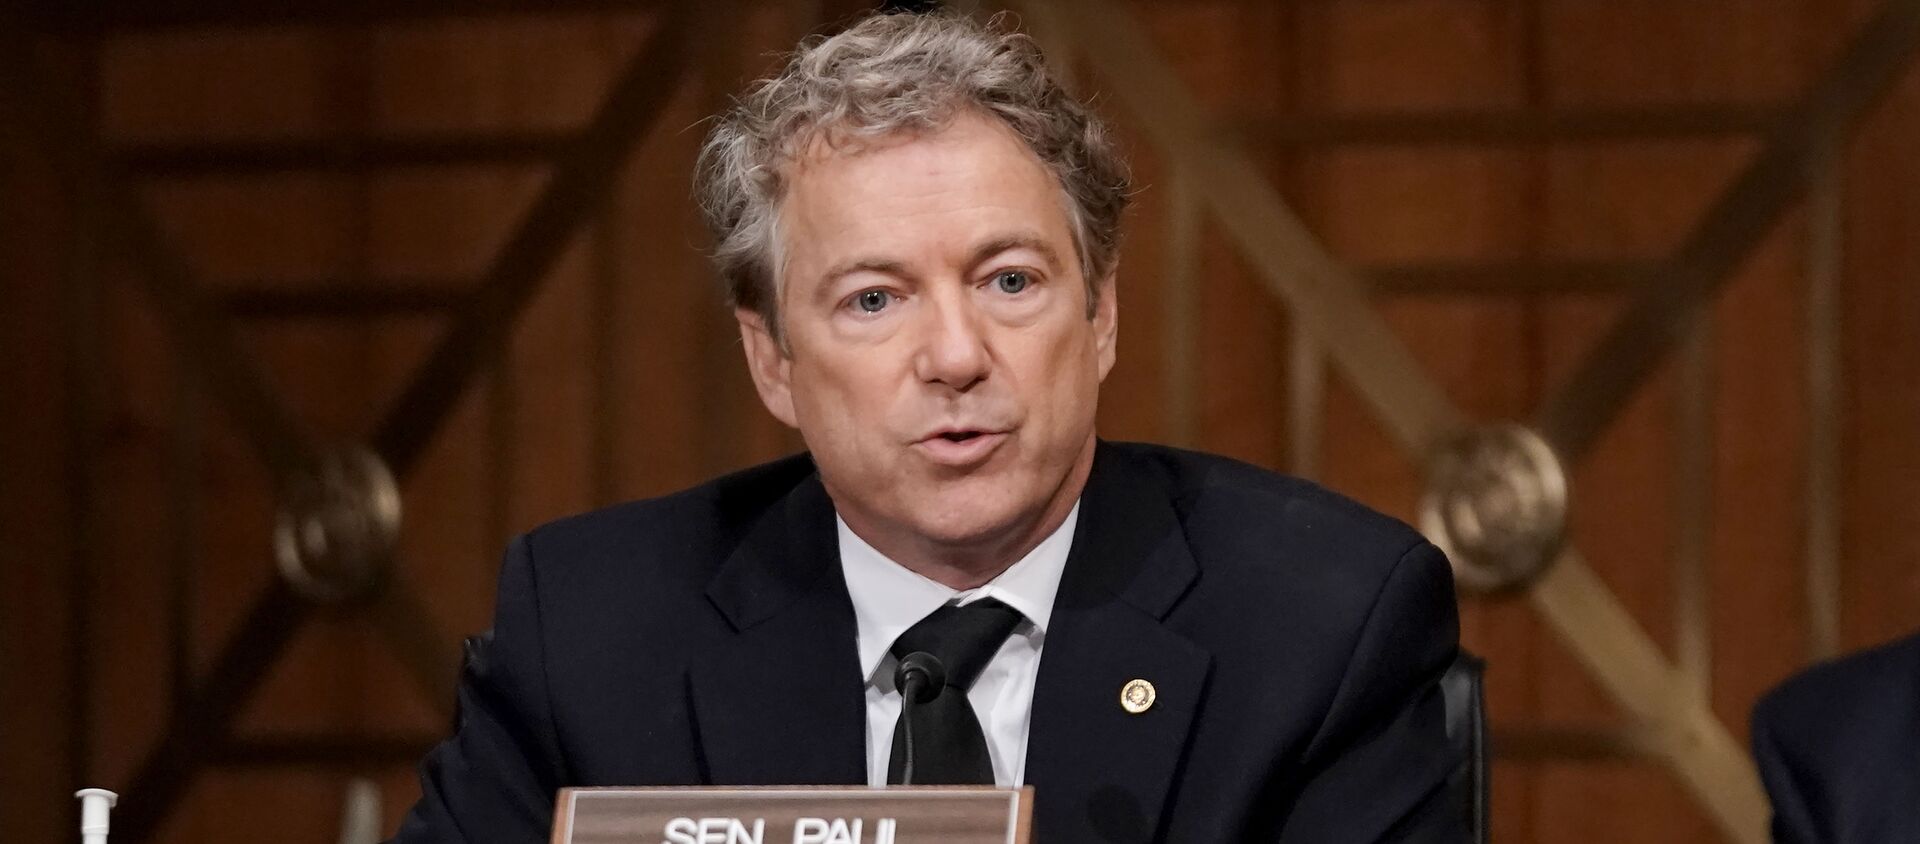 Sen. Rand Paul (R-KY) asks questions during a Senate Homeland Security and Governmental Affairs Committee hearing to discuss election security and the 2020 election process on December 16, 2020 in Washington, DC. - Sputnik International, 1920, 08.02.2021